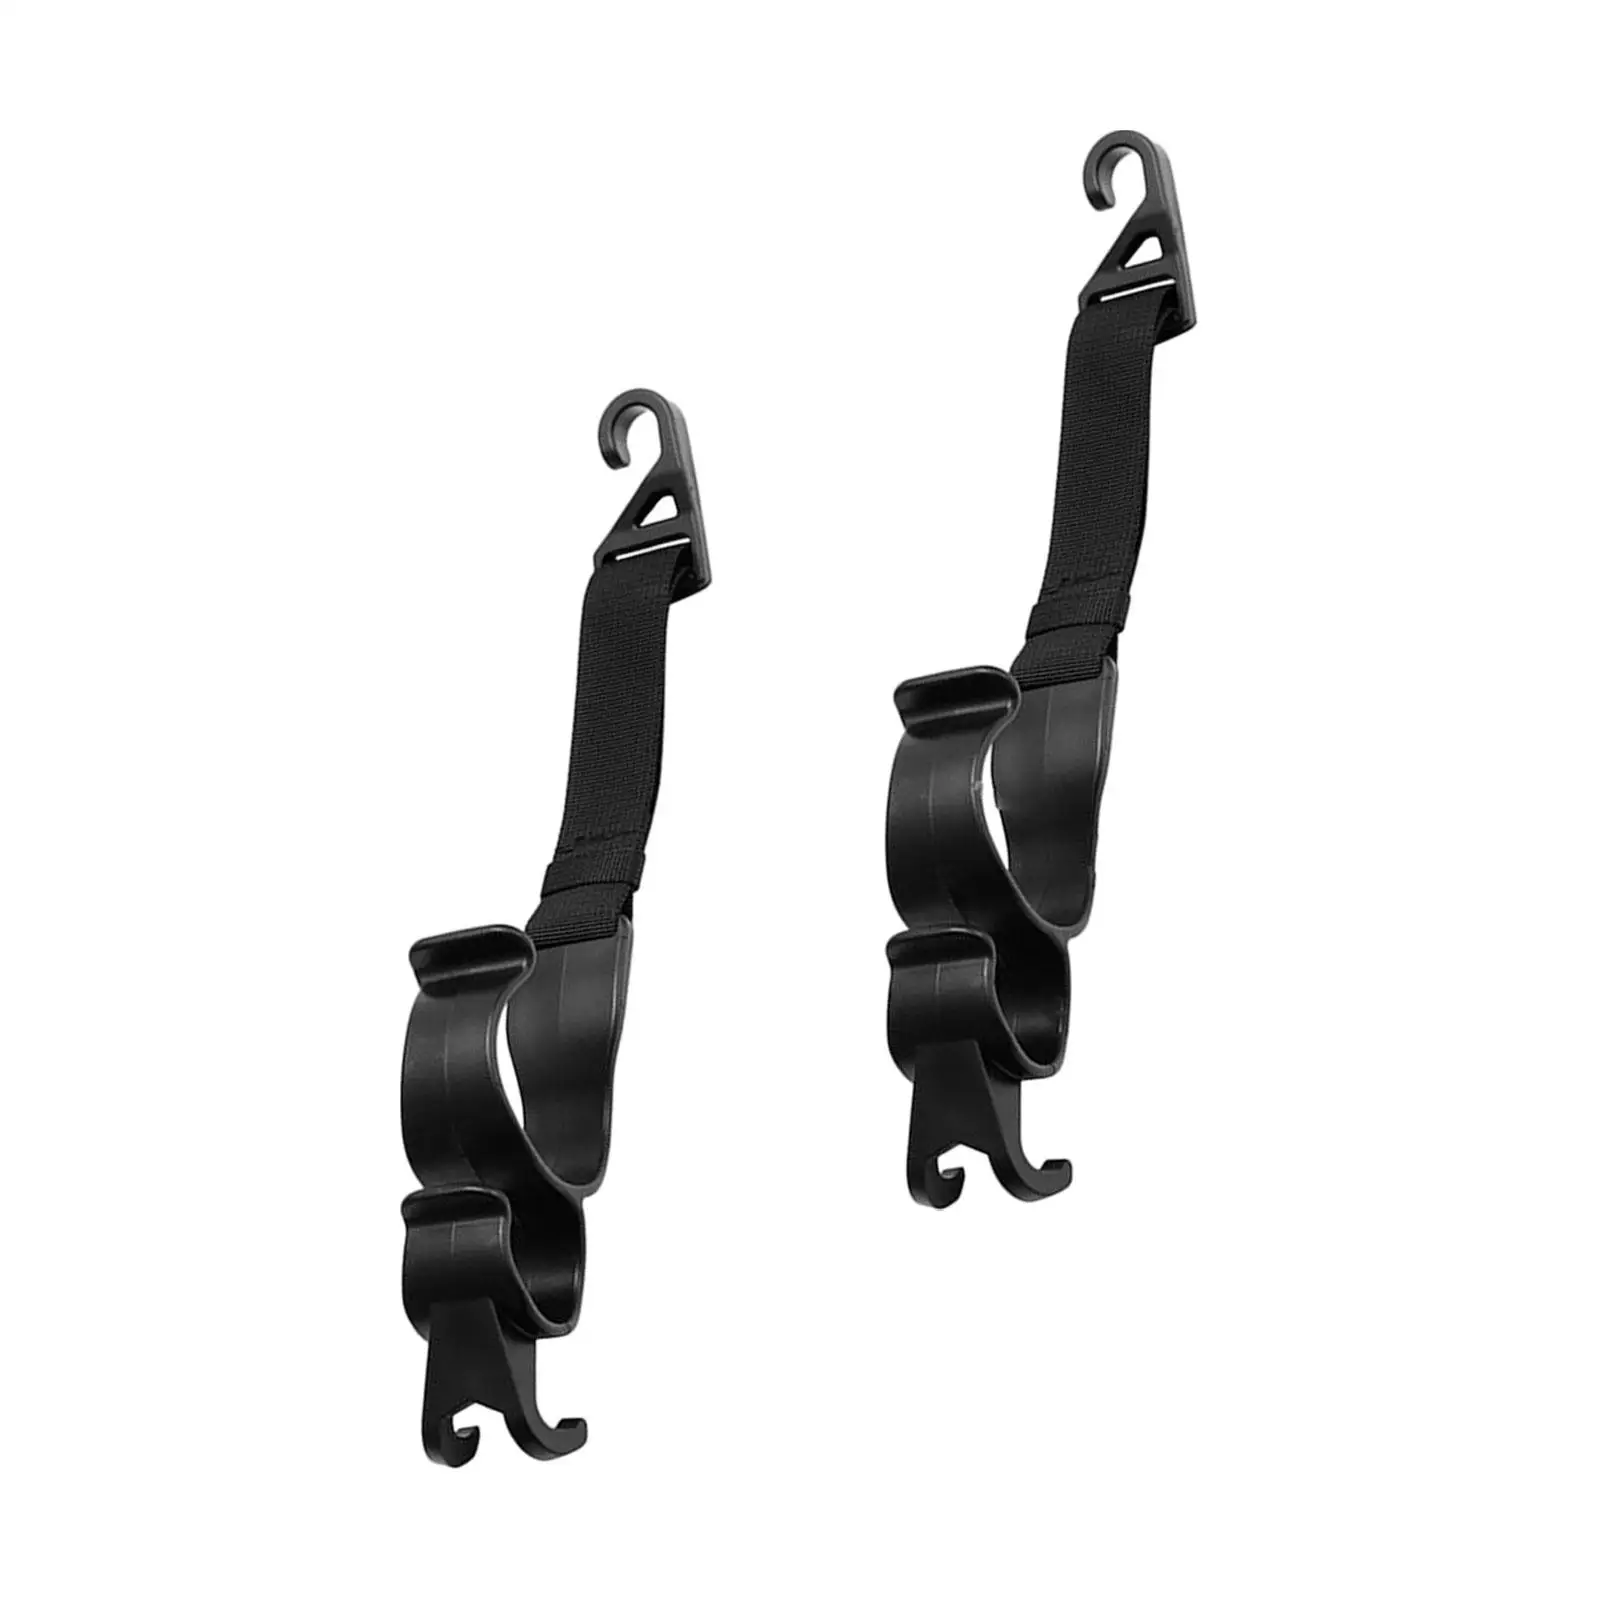 2Pcs Multifunctional Car Seat Hooks Interior Accessories Storage Organizer Seat Back Hook Hanger for Grocery Bags Backpacks